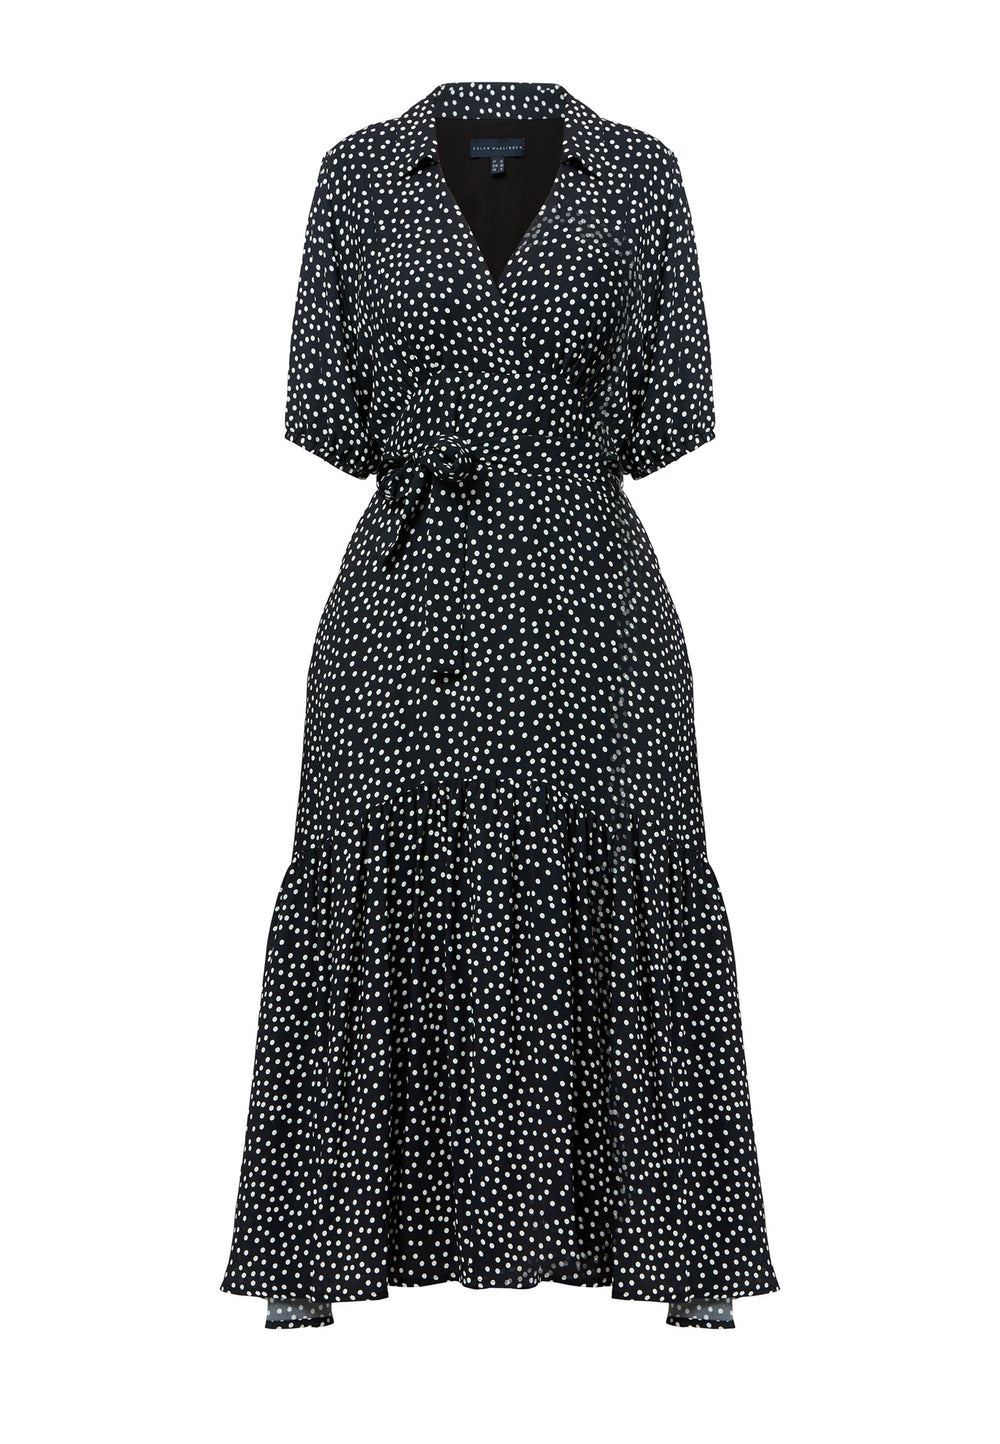 Raquel channels 30's glamour with its classic navy and white polka dot design in our favored viscose crepe. This dress boasts a flattering fit-and-flare skirt and a cross-over V-neckline. A soft belt cinches the waist, offering a customizable look that enhances the figure—whether tied at the front or back, the belt provides styling versatility. Elbow-length sleeves complete the 30's-inspired silhouette, making it a versatile wardrobe essential.